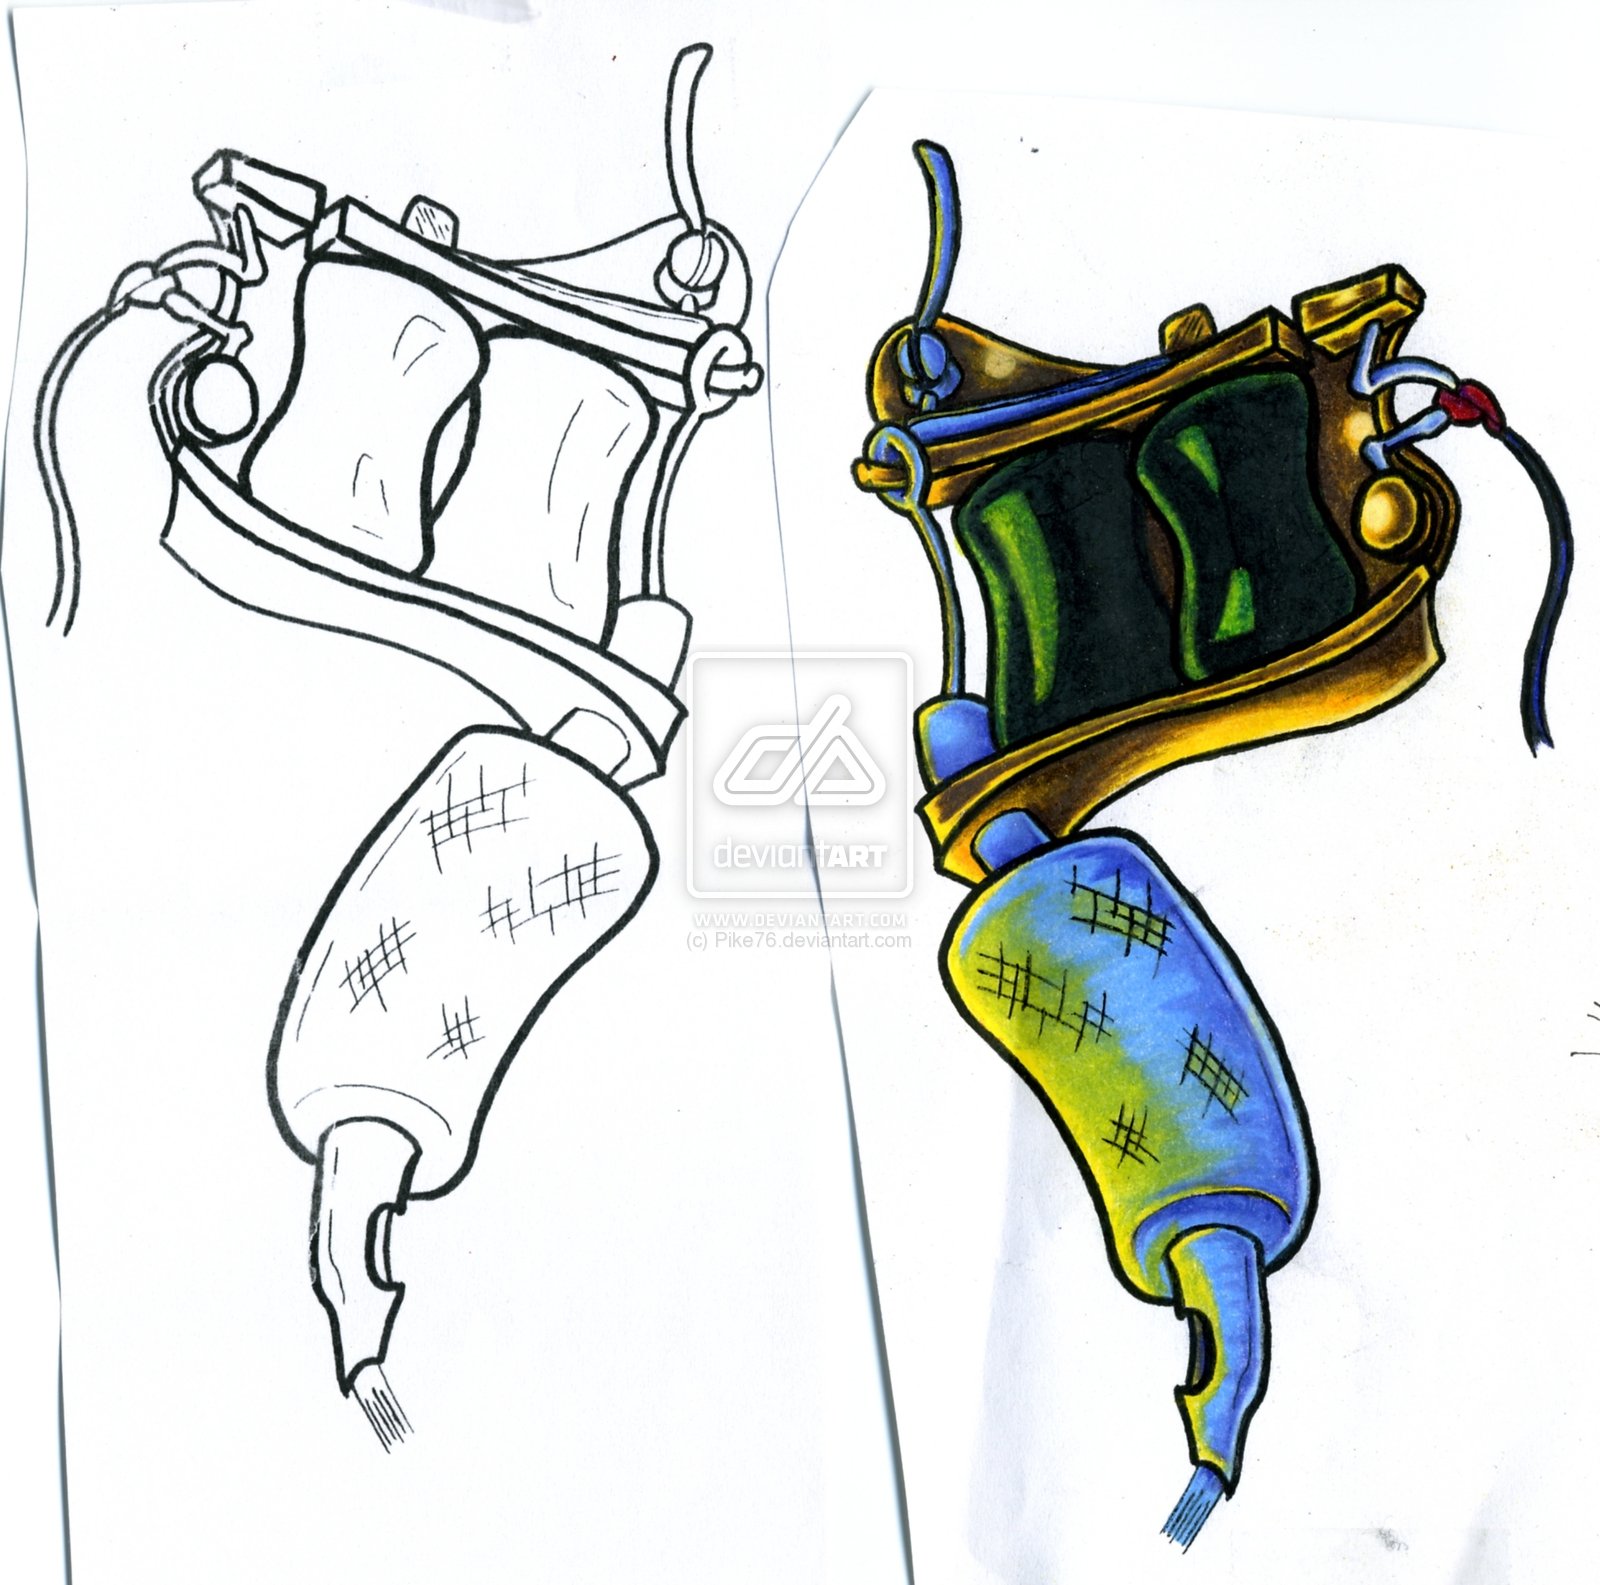 Another Tattoo Machine By Pike76 On Deviantart